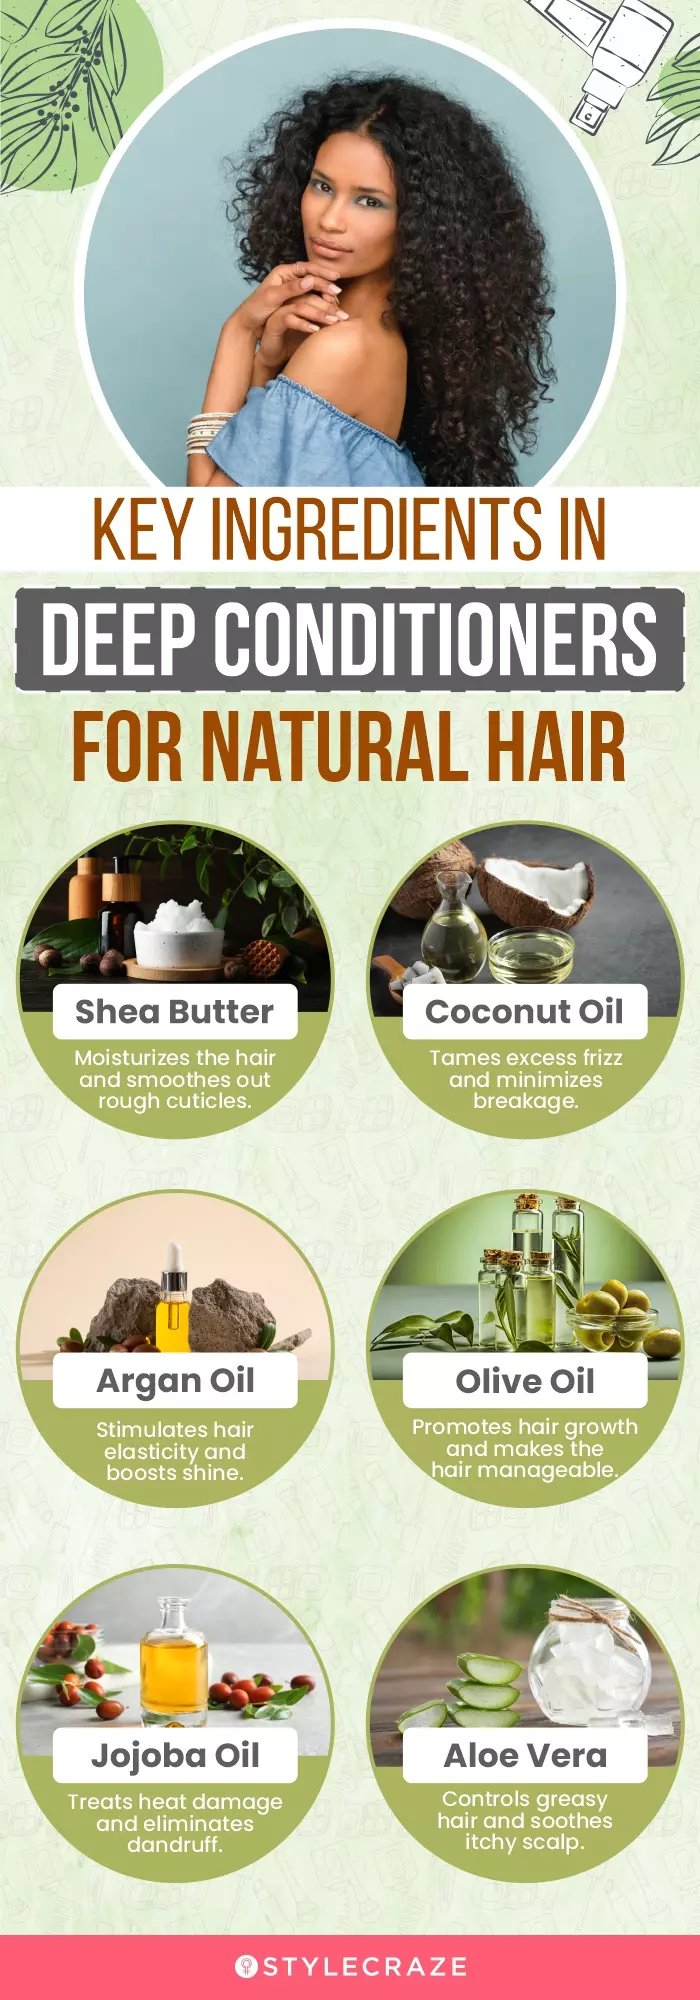 Key Ingredients In Deep Conditioners For Natural Hair(infographic)